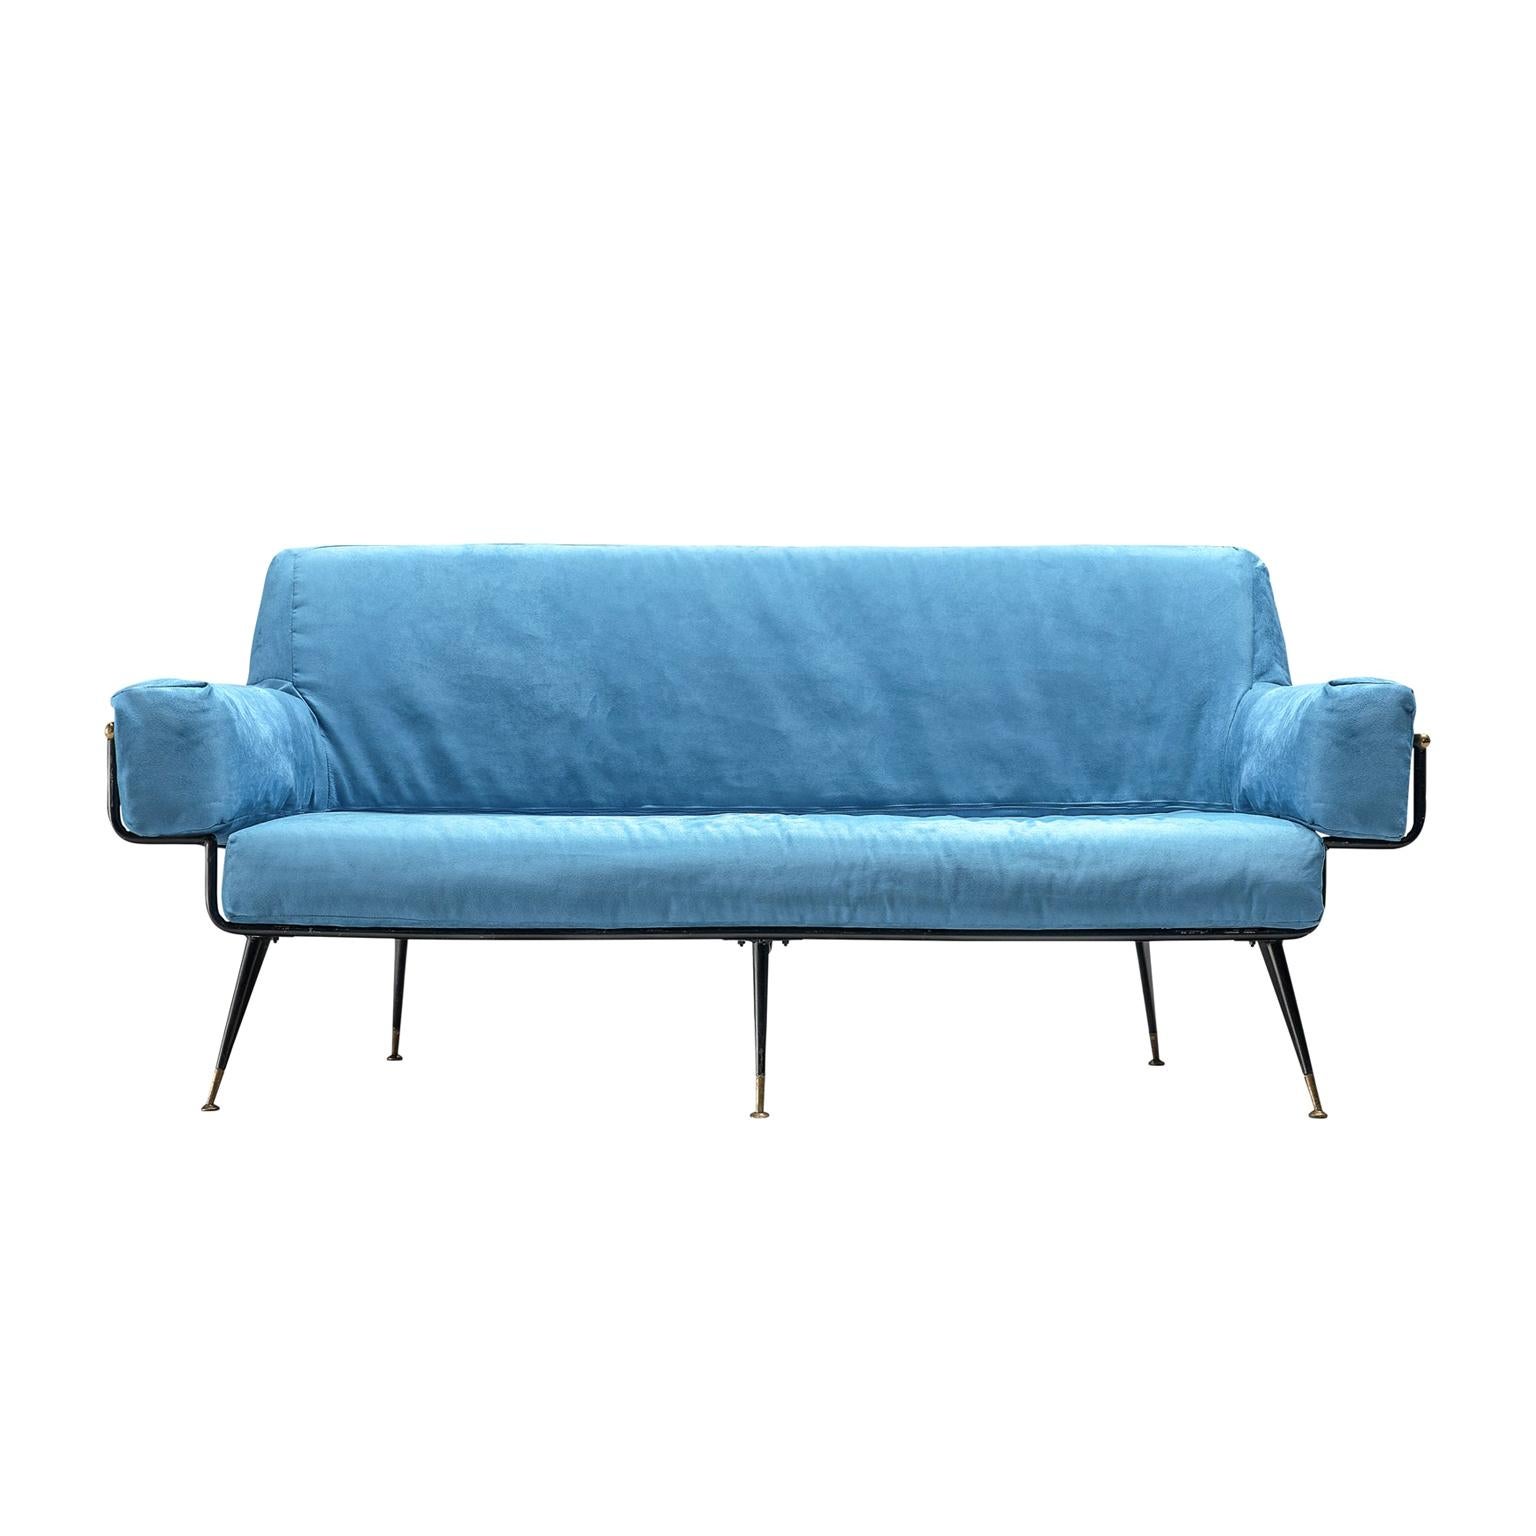 Valla Rito Sofa with Metal Frame in Azure Blue Upholstery